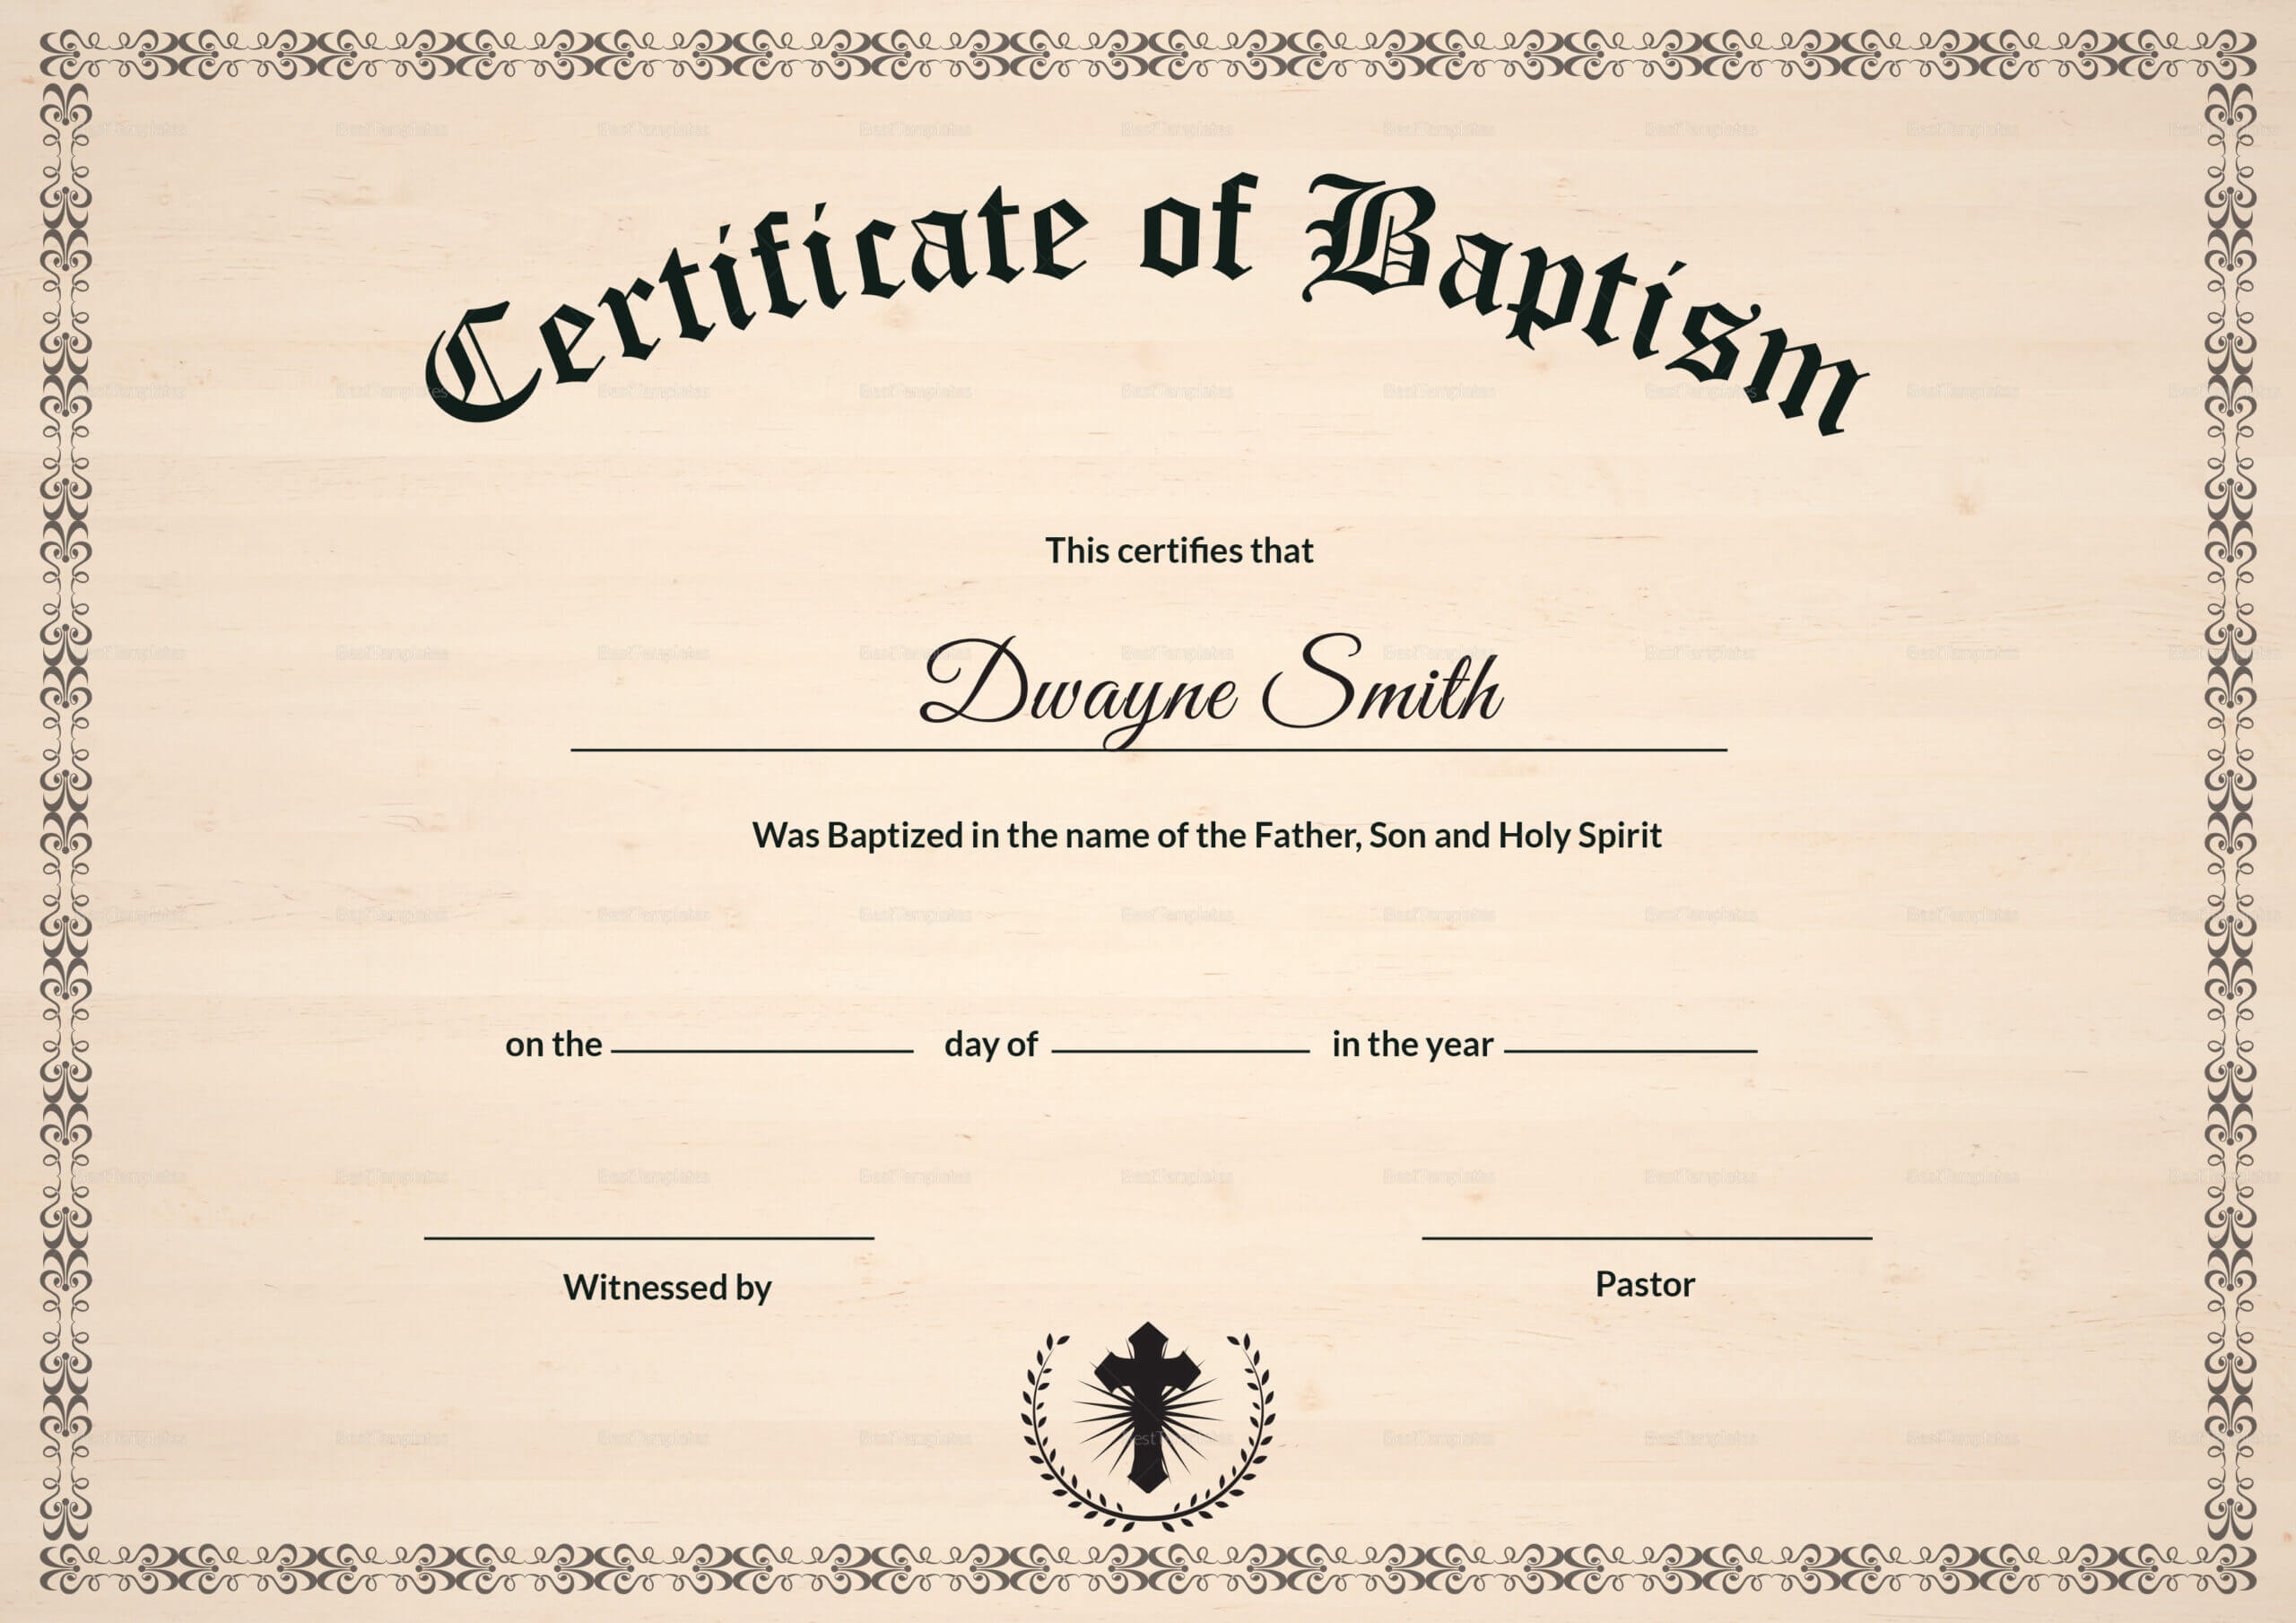 Baptism Certificate Template Download - Topa.mastersathletics.co Throughout Baptism Certificate Template Download